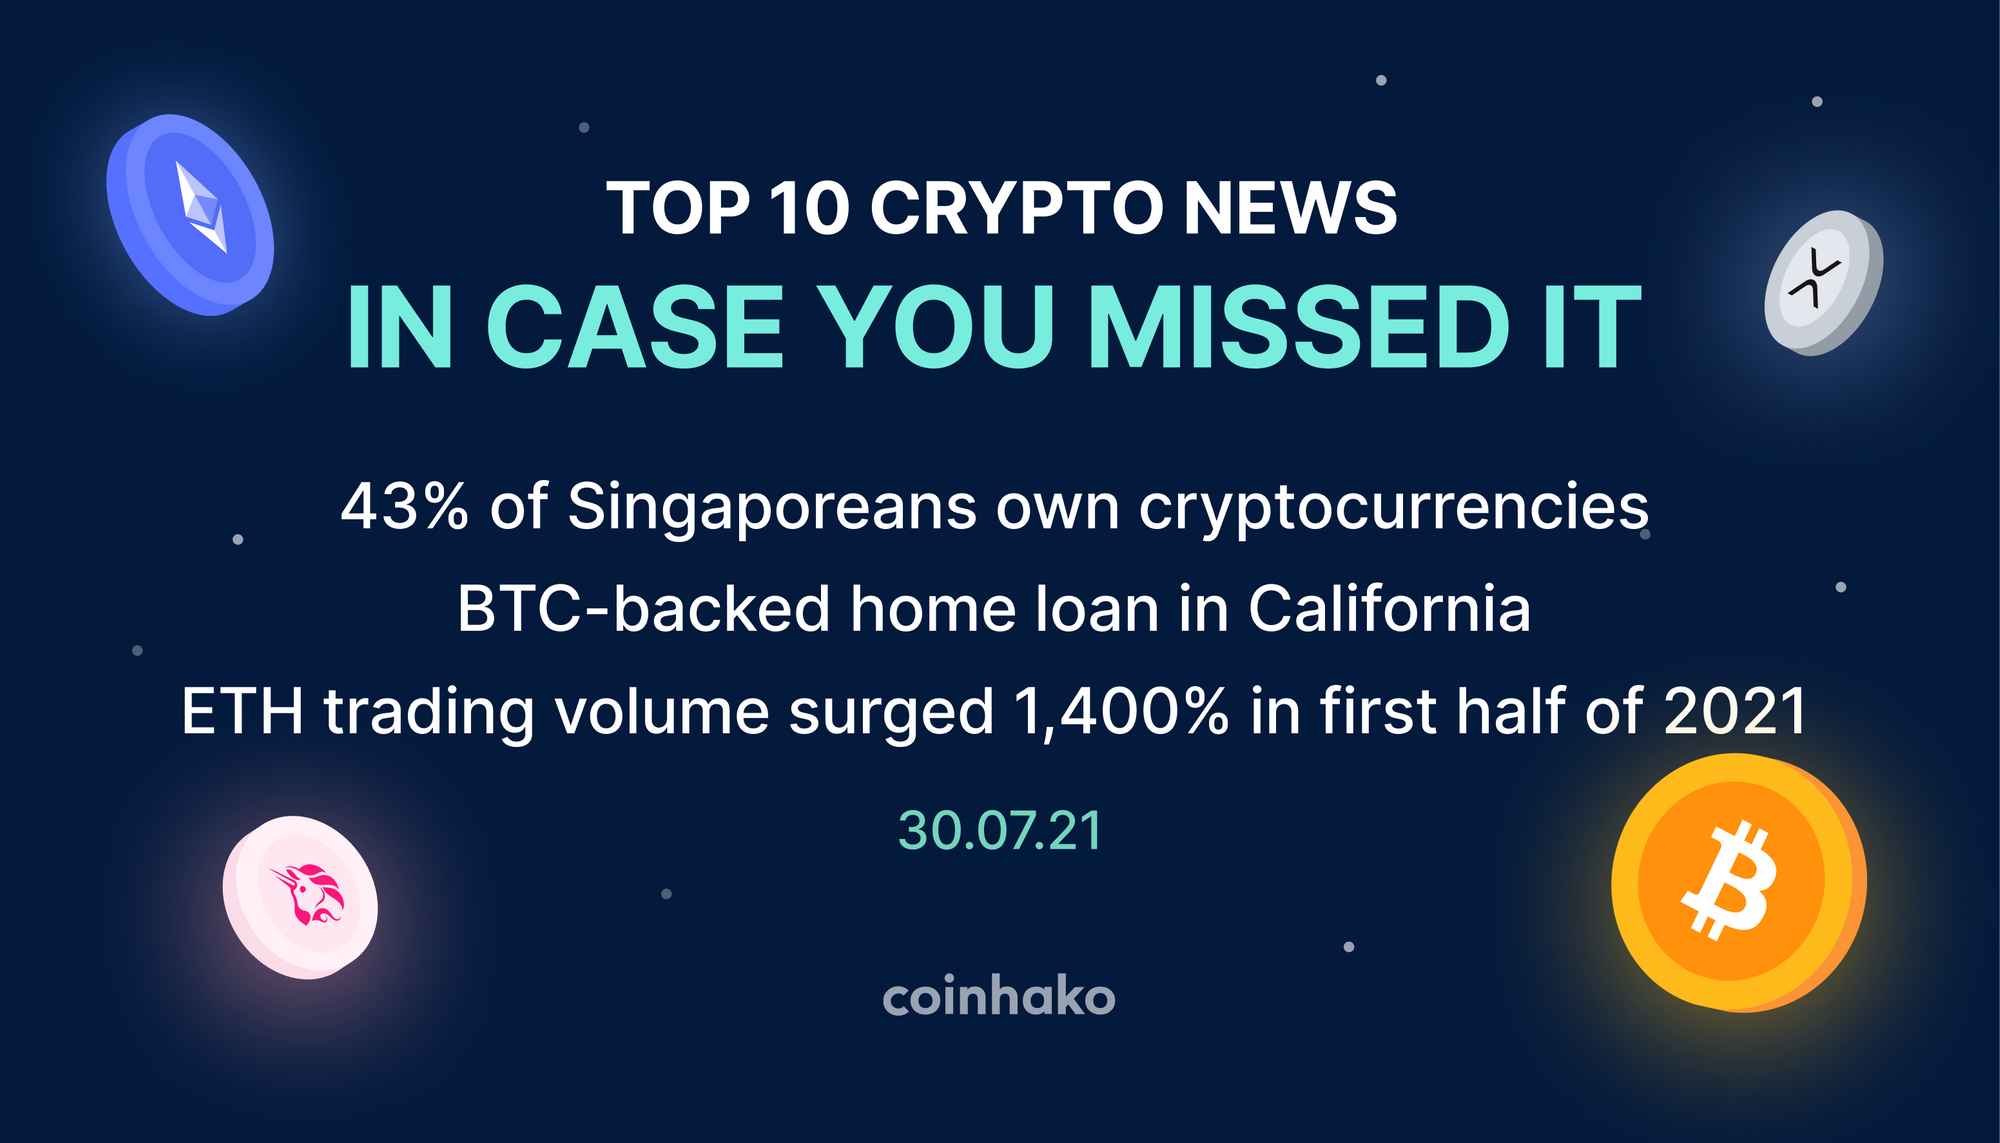 Top 10 Crypto News In Case You Missed It: 43% of Singaporeans Own Crypto, Coca-Cola Launches Own NFT Collection, Yahoo! Partners with LINE to enable NFT trading